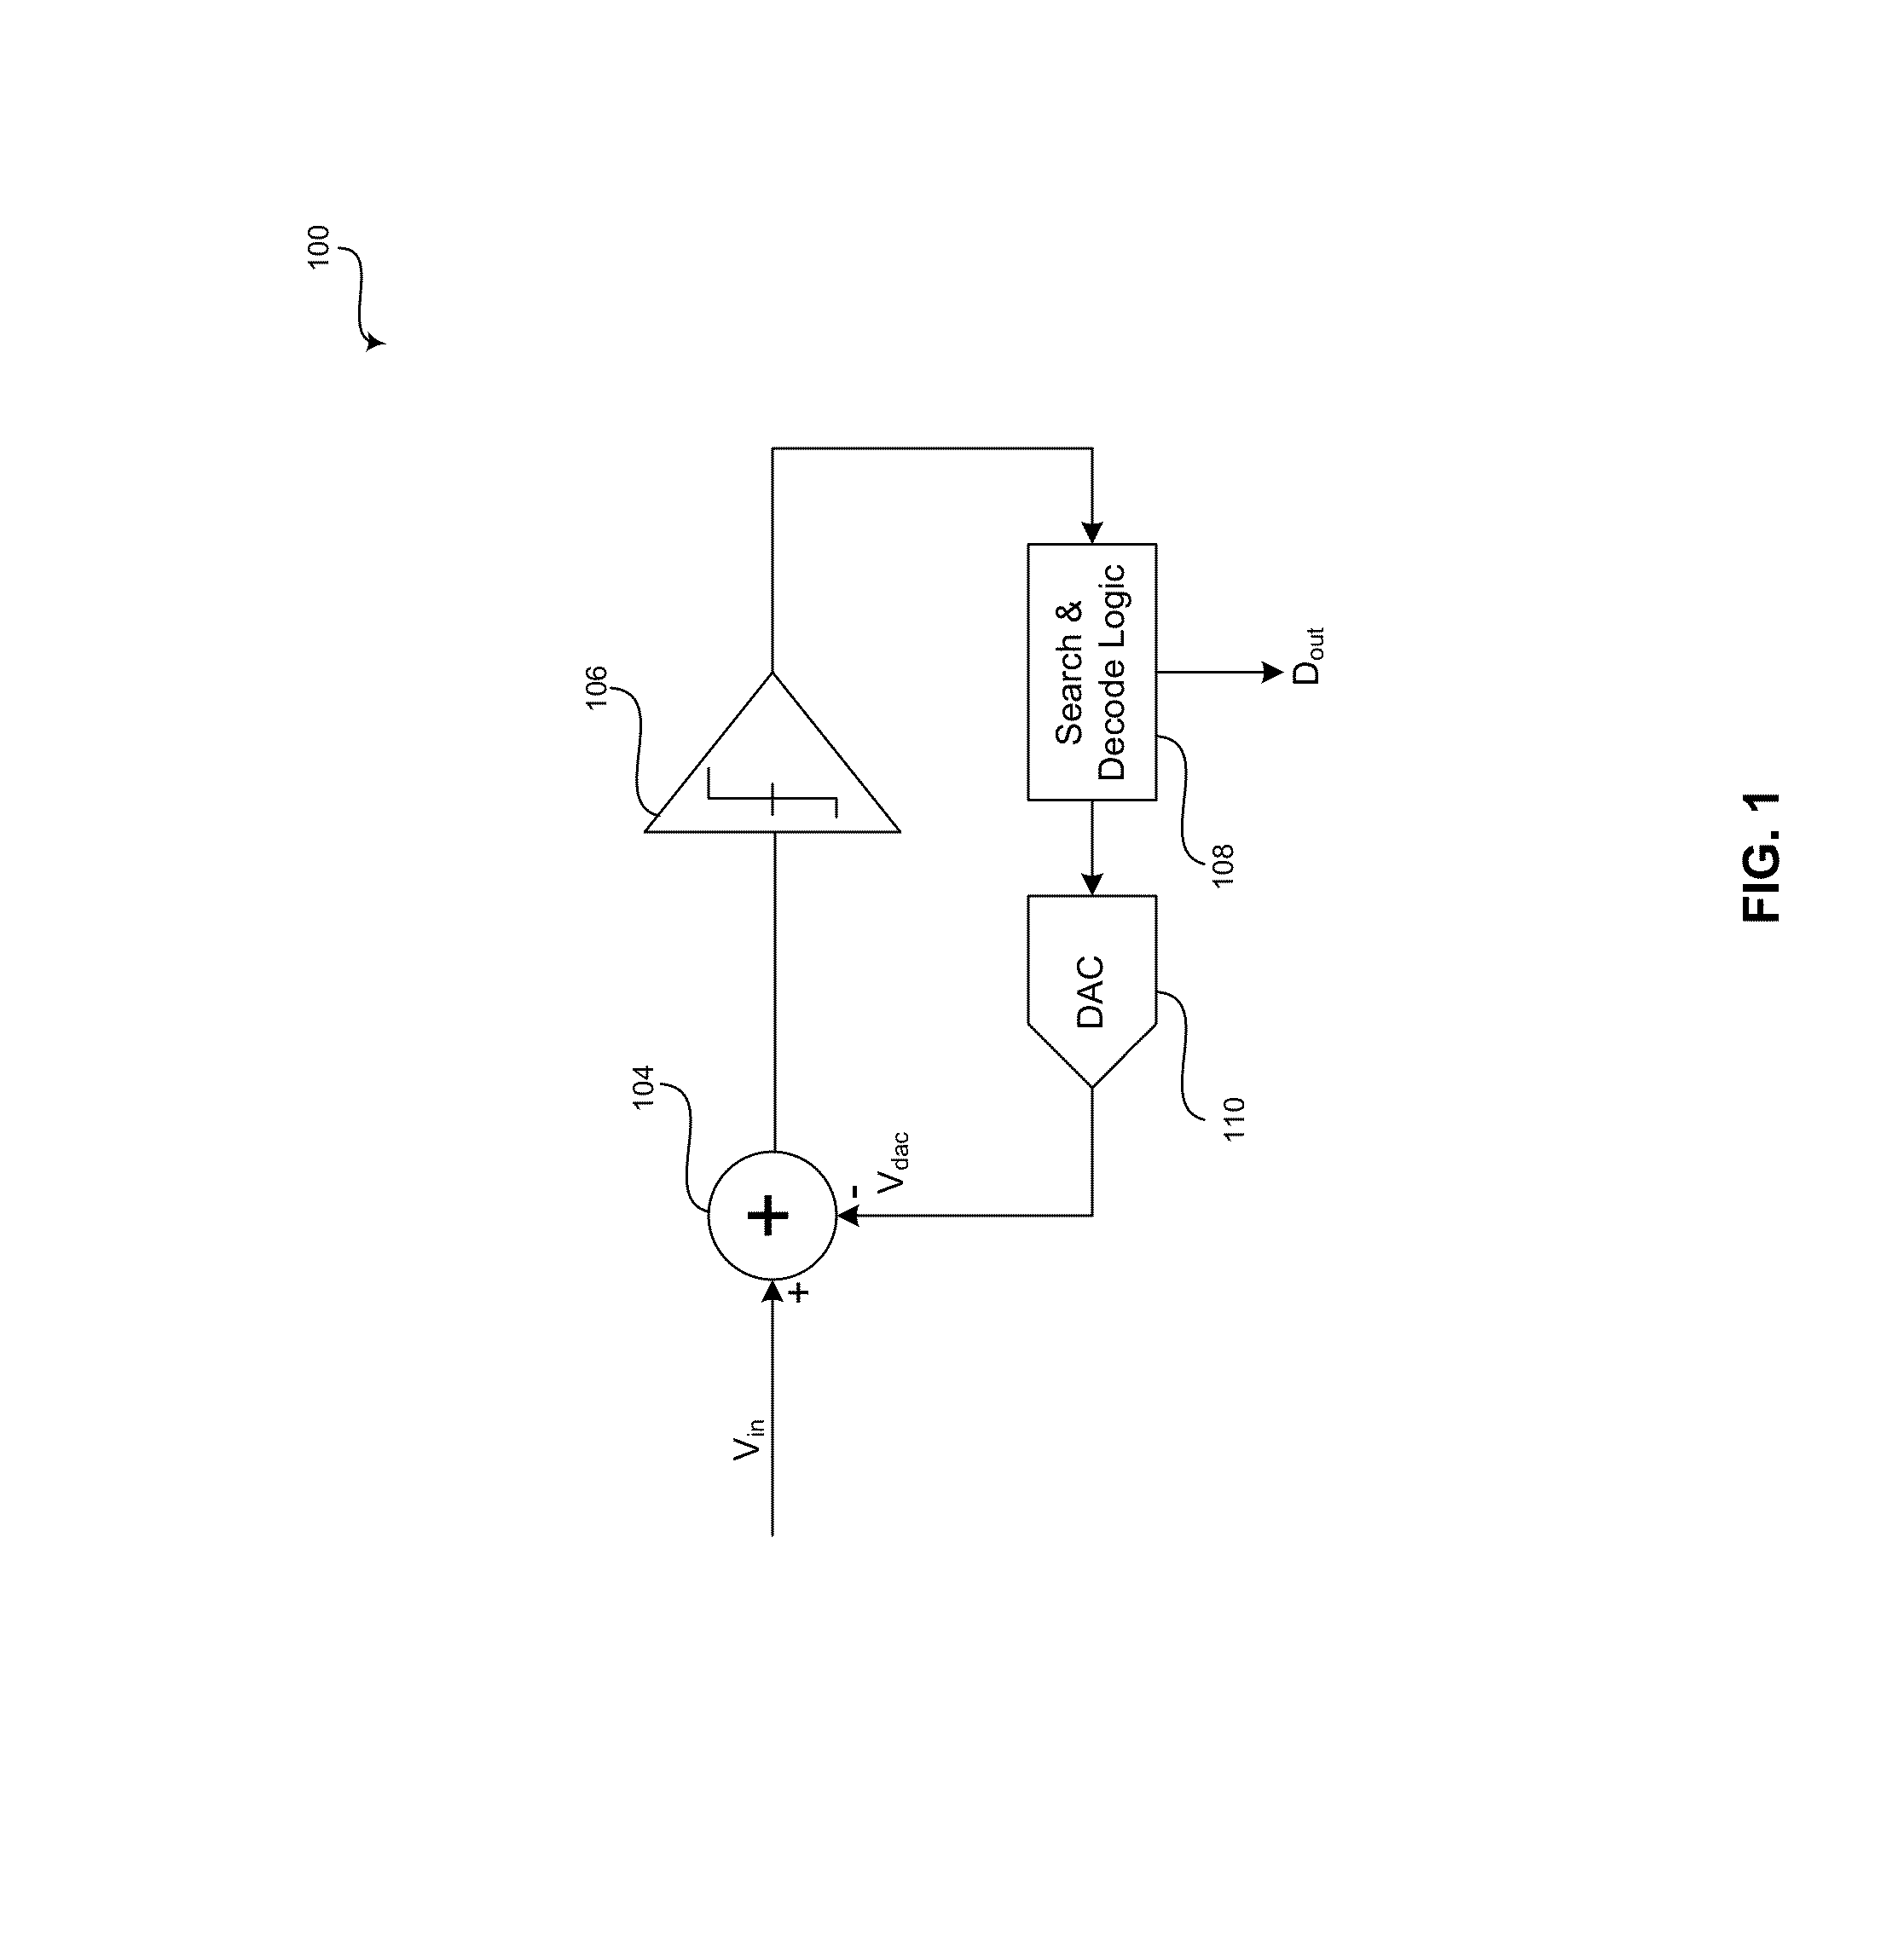 Method and system for asynchronous successive approximation register (SAR) analog-to-digital converters (ADCS)